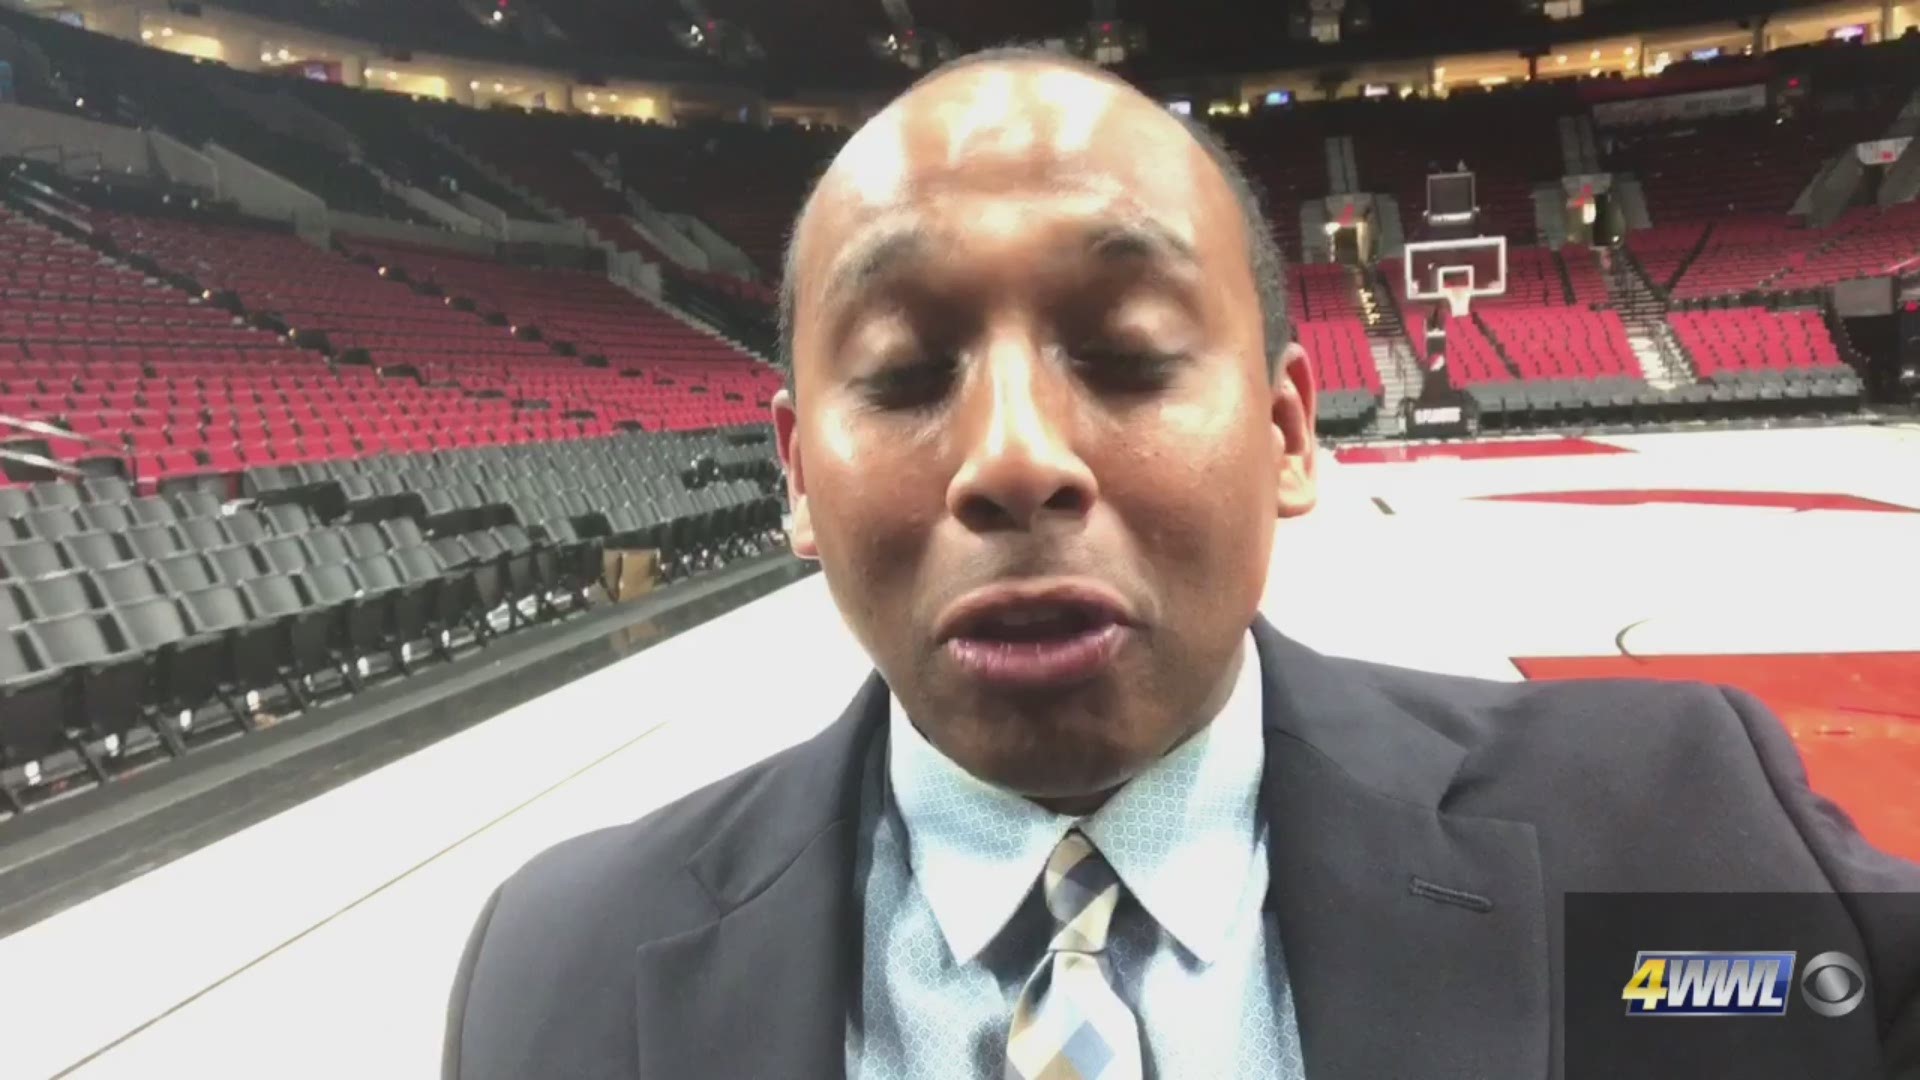 Ricardo Lecompte talks about the Pelicans Game 2 win over the Blazers, putting them up 2-0.